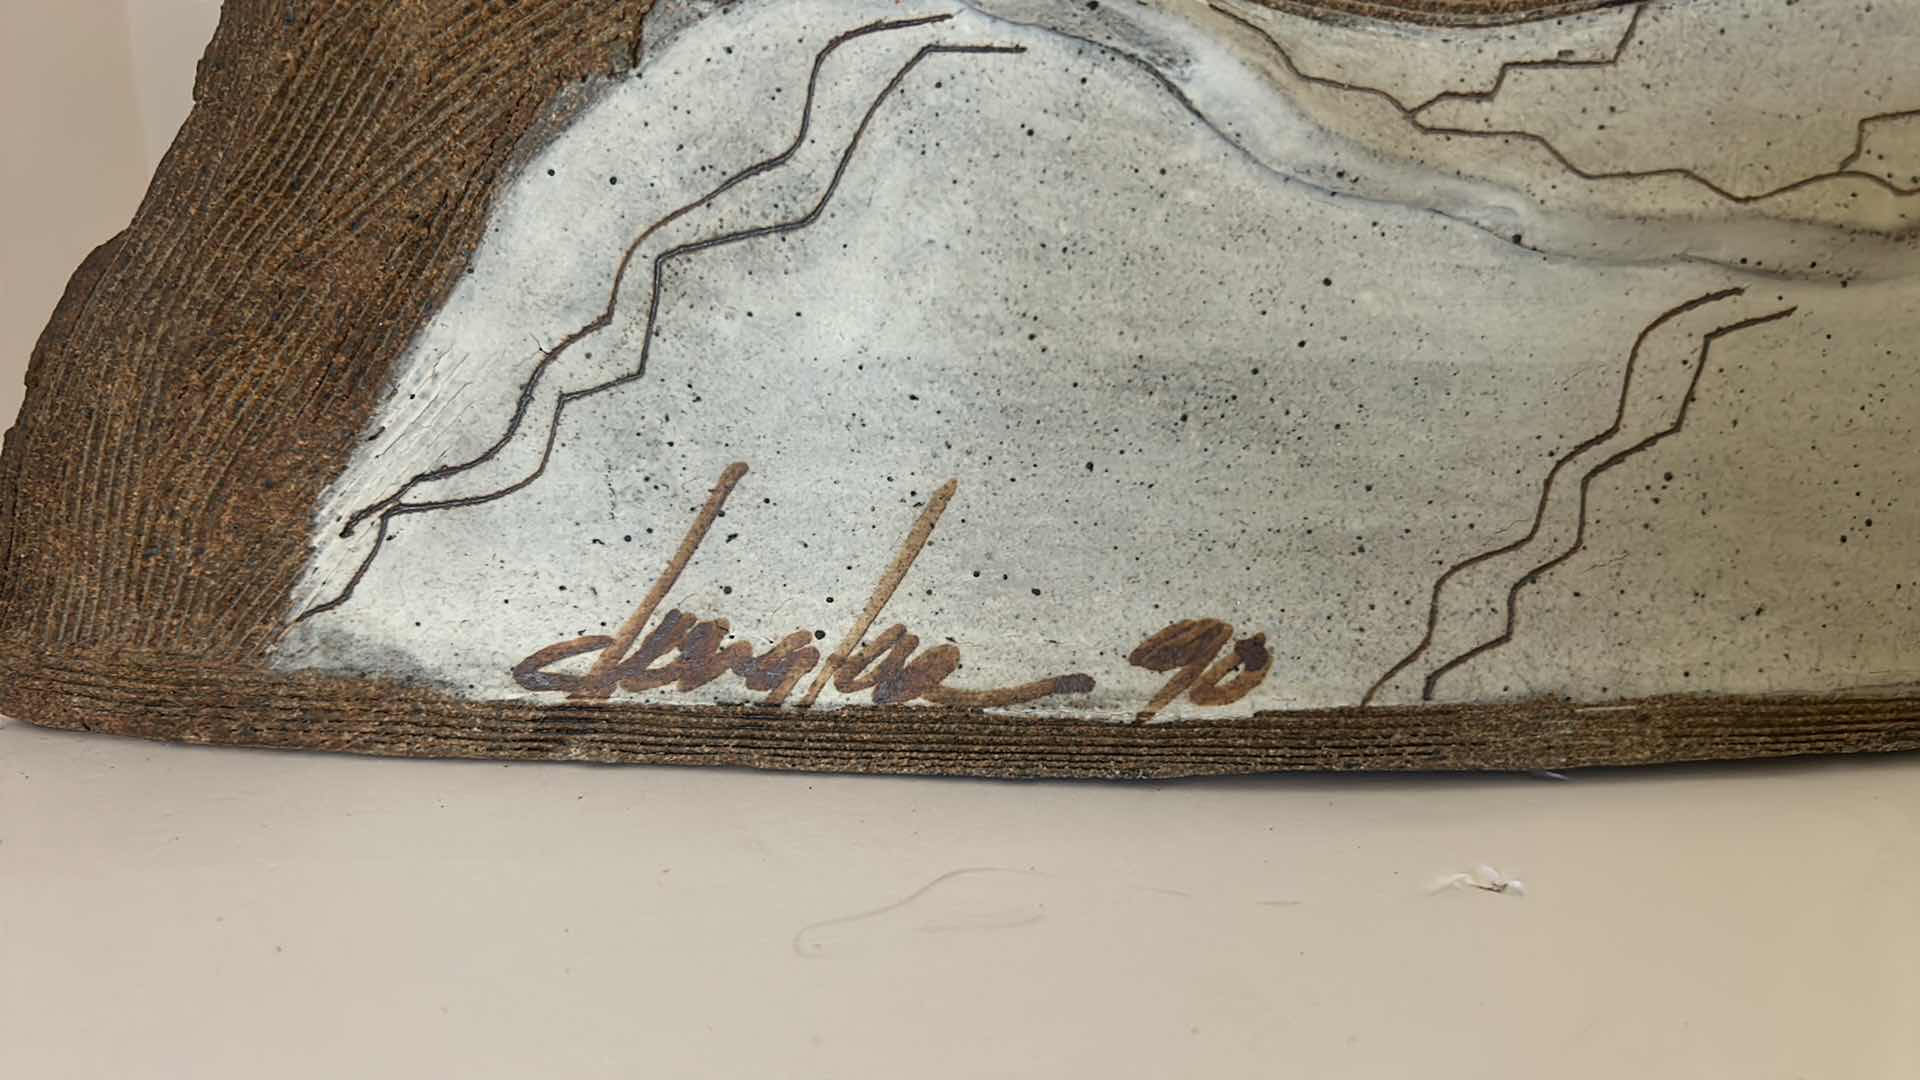 Photo 6 of SIGNED SCULPTED HAND-PAINTED CERAMIC SCULPTURE 28” x 14”